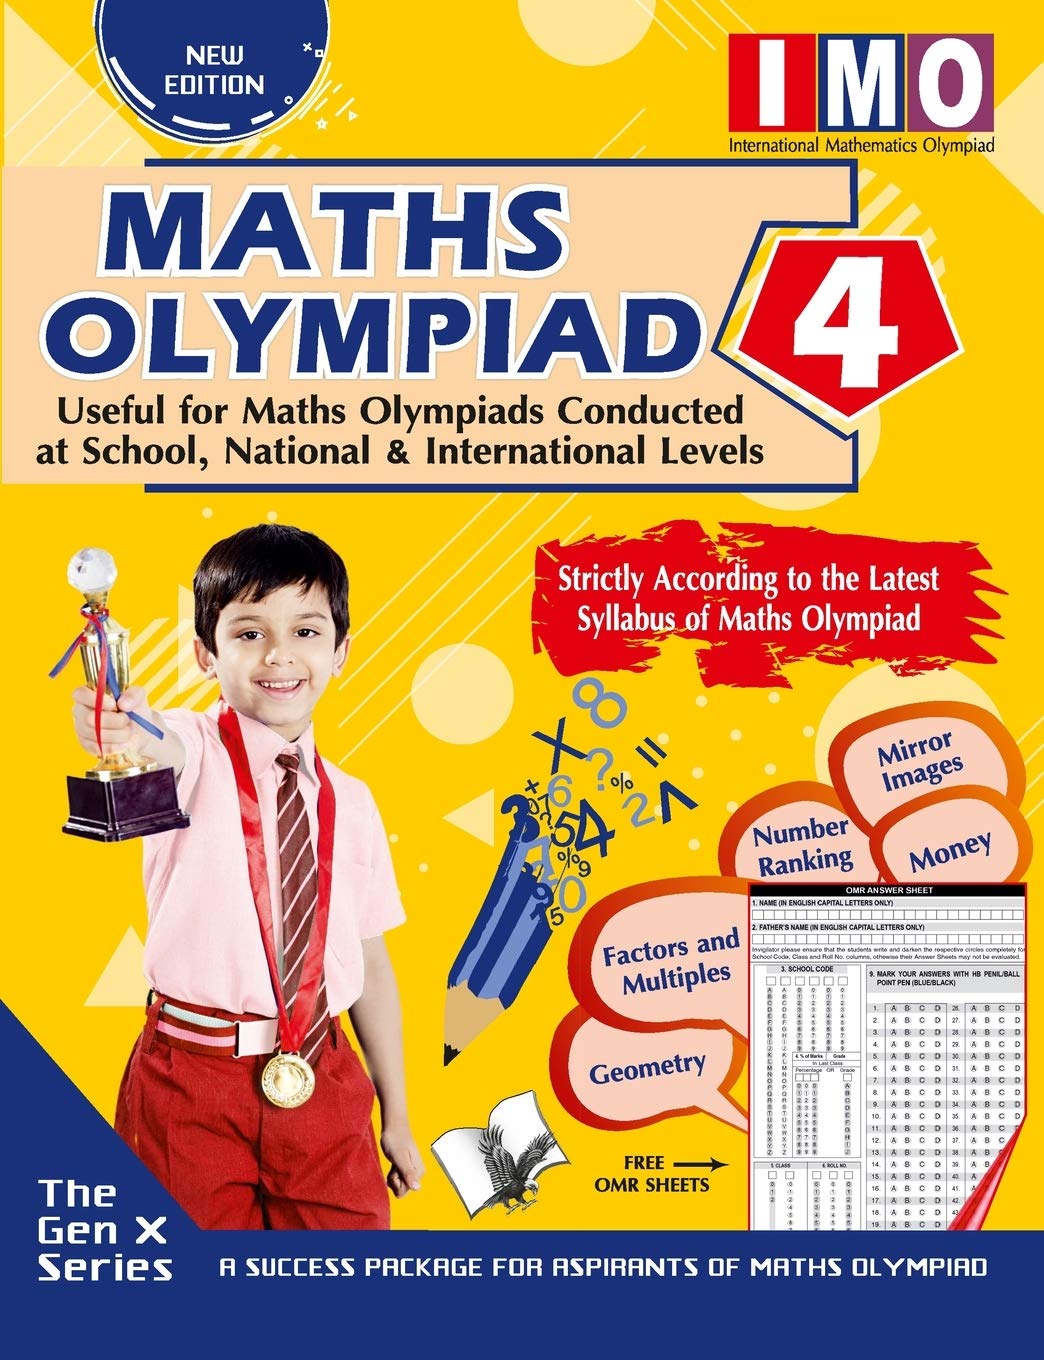 MATHS OLYMPIAD 4 (USEFUL FOR MATHS OLYMPIADS CONDUCTED AT SCHOOL, NATIONAL & INTERNATIONAL LEVELS)